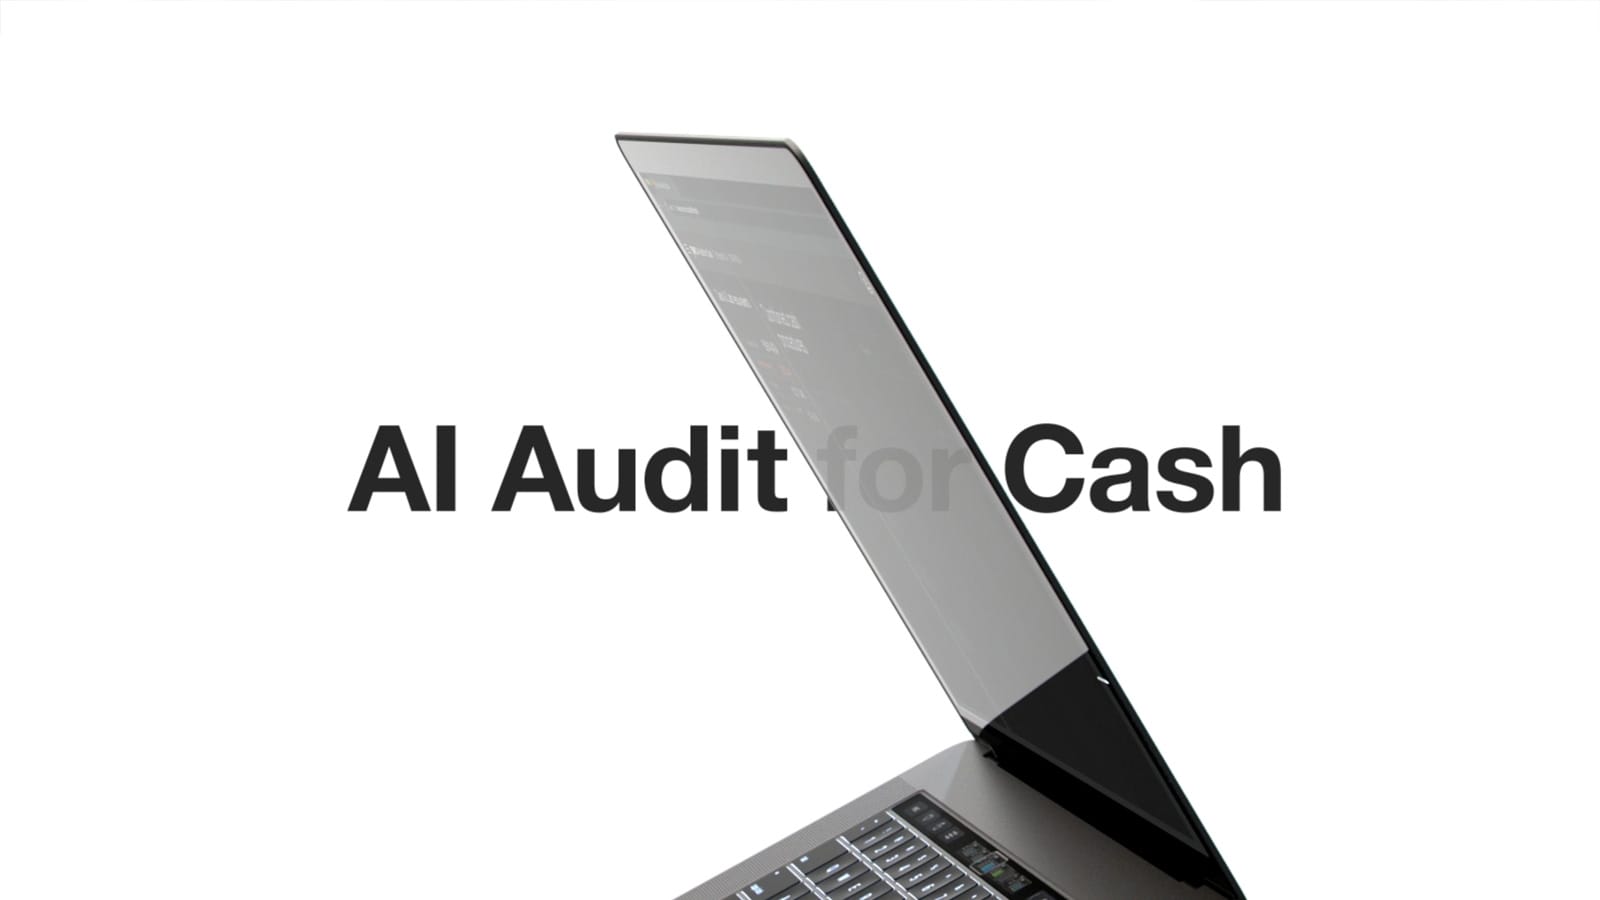 Cash and the audit